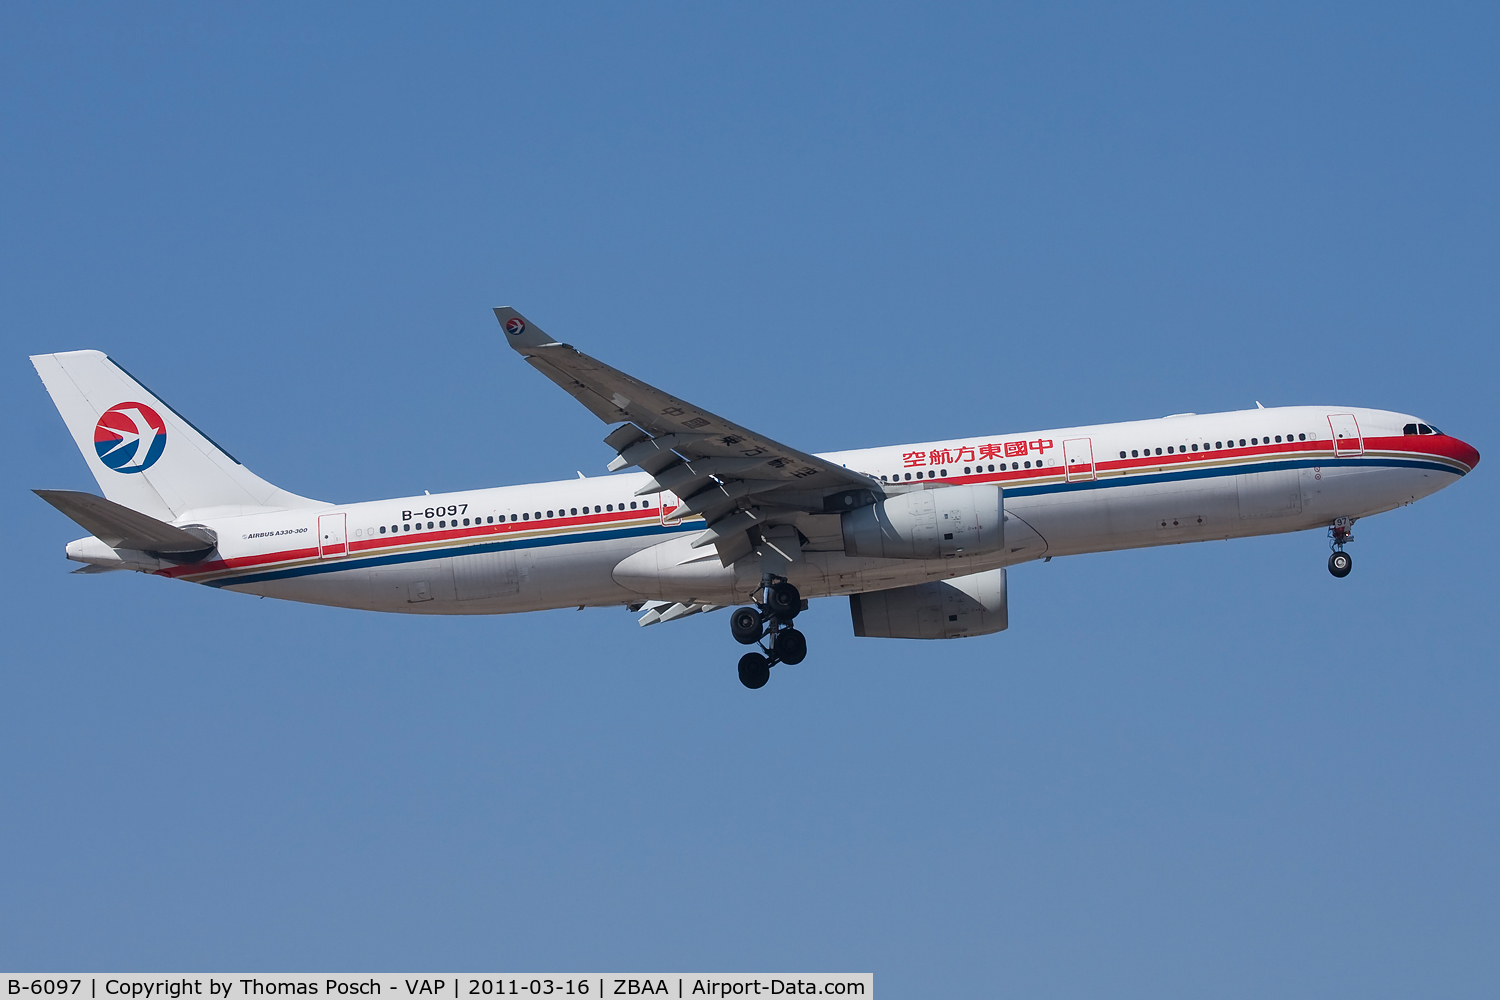 B-6097, 2007 Airbus A330-343X C/N 866, China Eastern Airlines